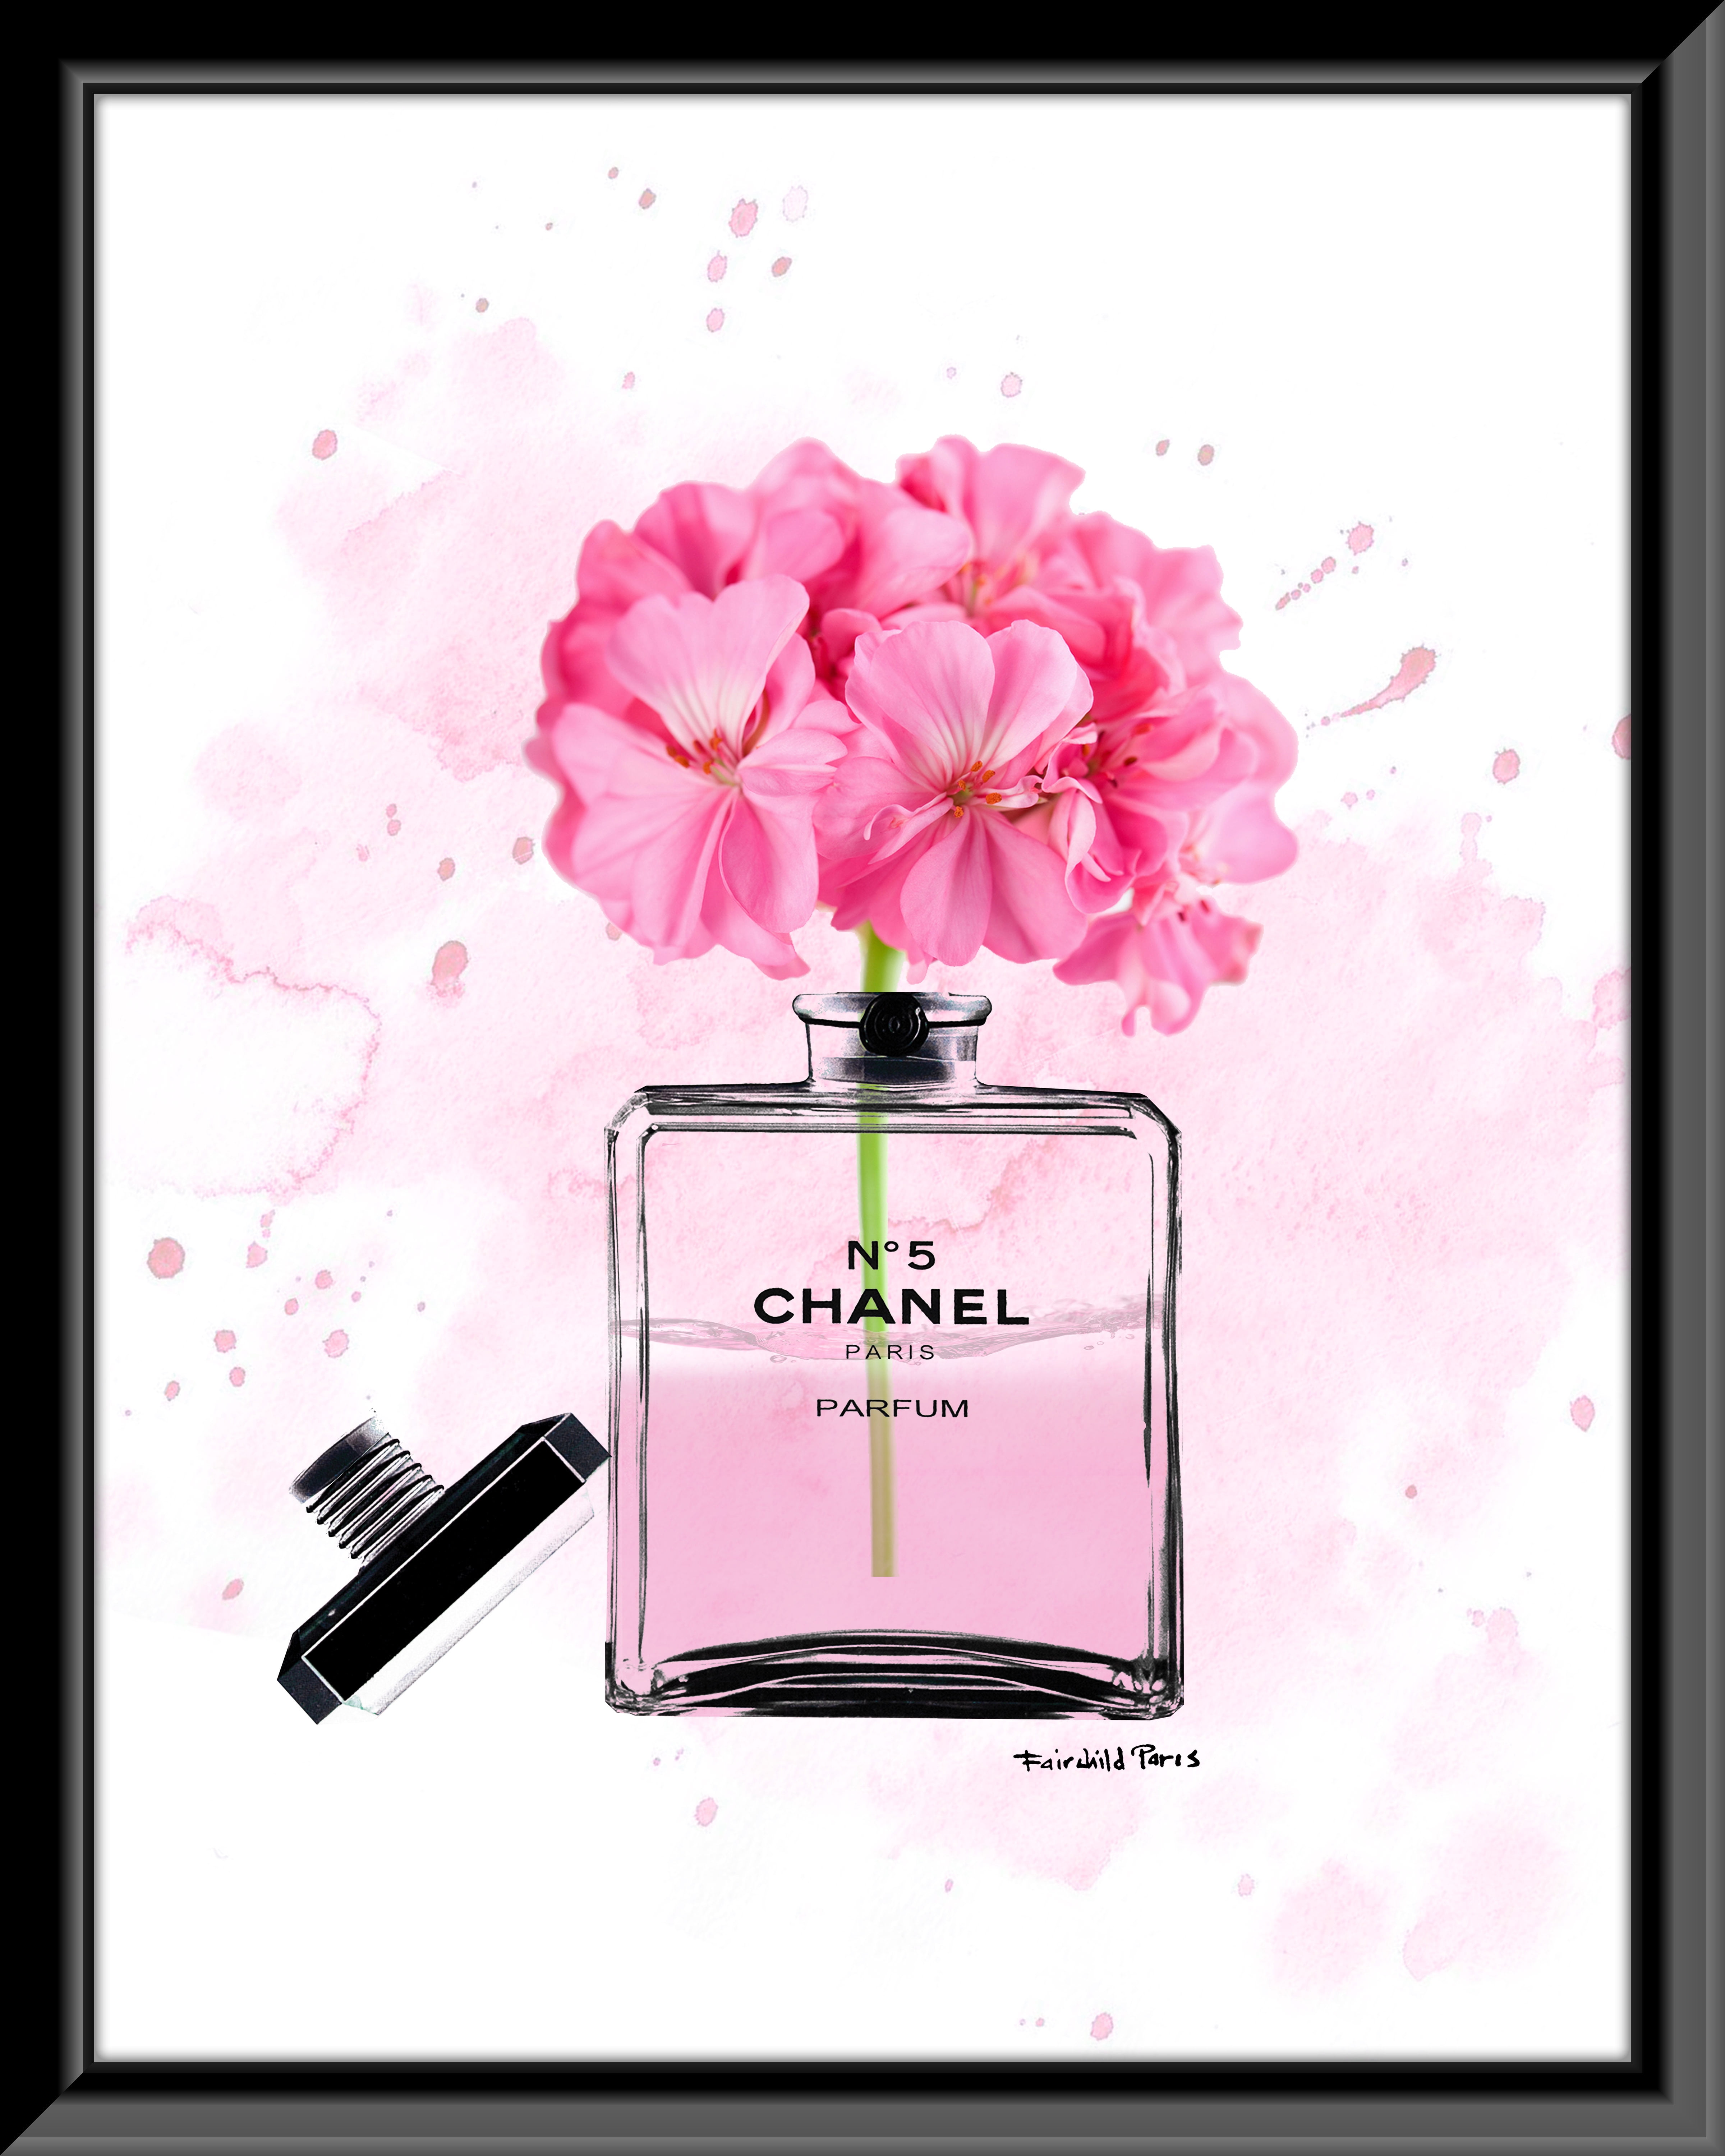 Venice Beach Collection's Pink Flowers in a Glam Perfume Bottle 14x18  Framed Print 